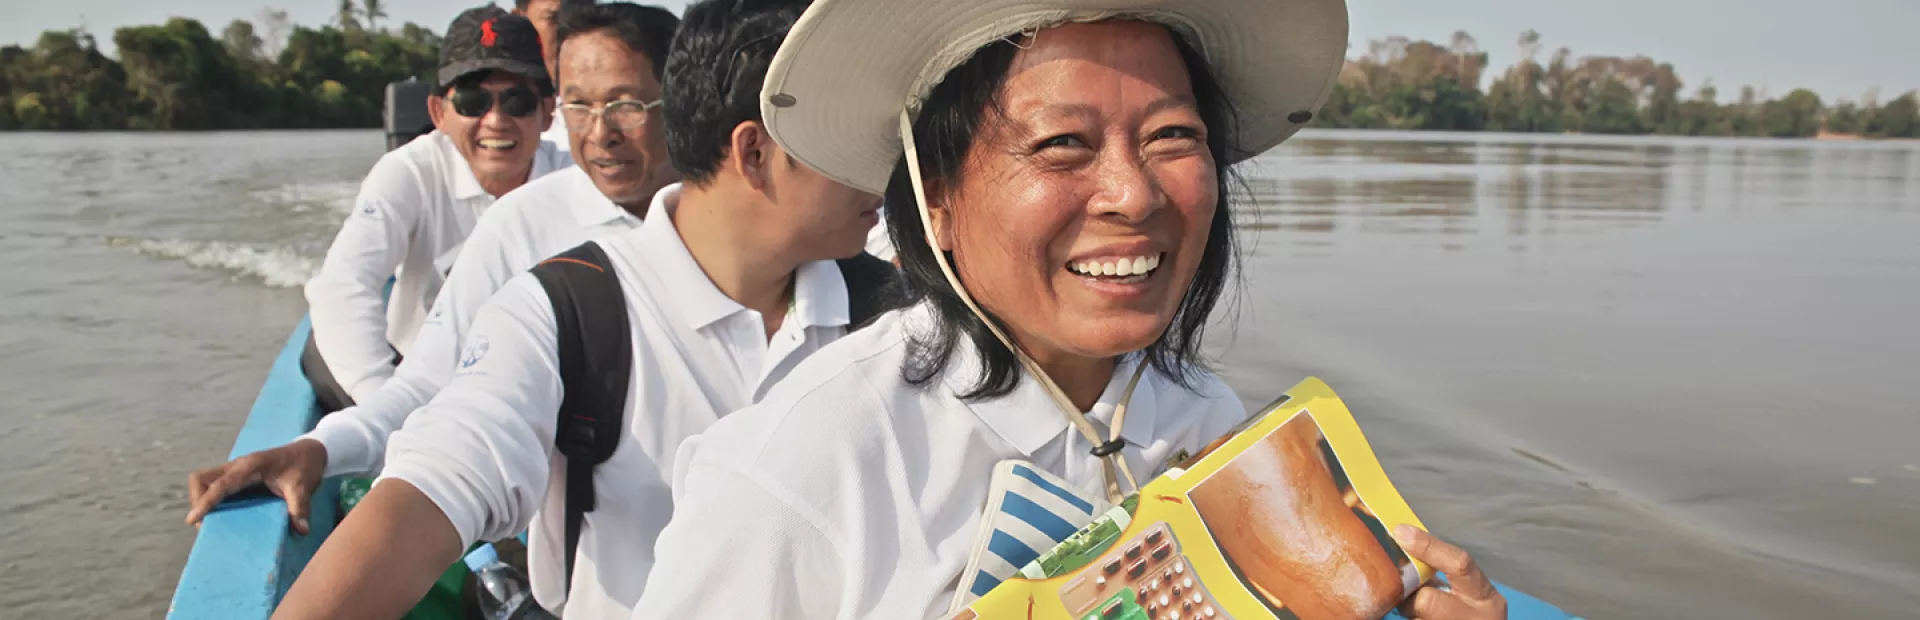 Image of people in a boat in Cambodia holding poster with information about treatment of leprosy